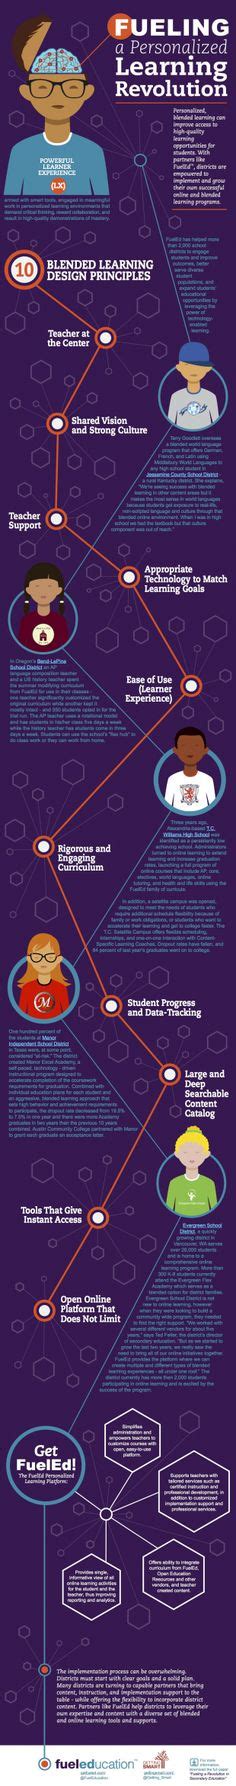 95 Best Edtech Infographics Images Education Educational Technology